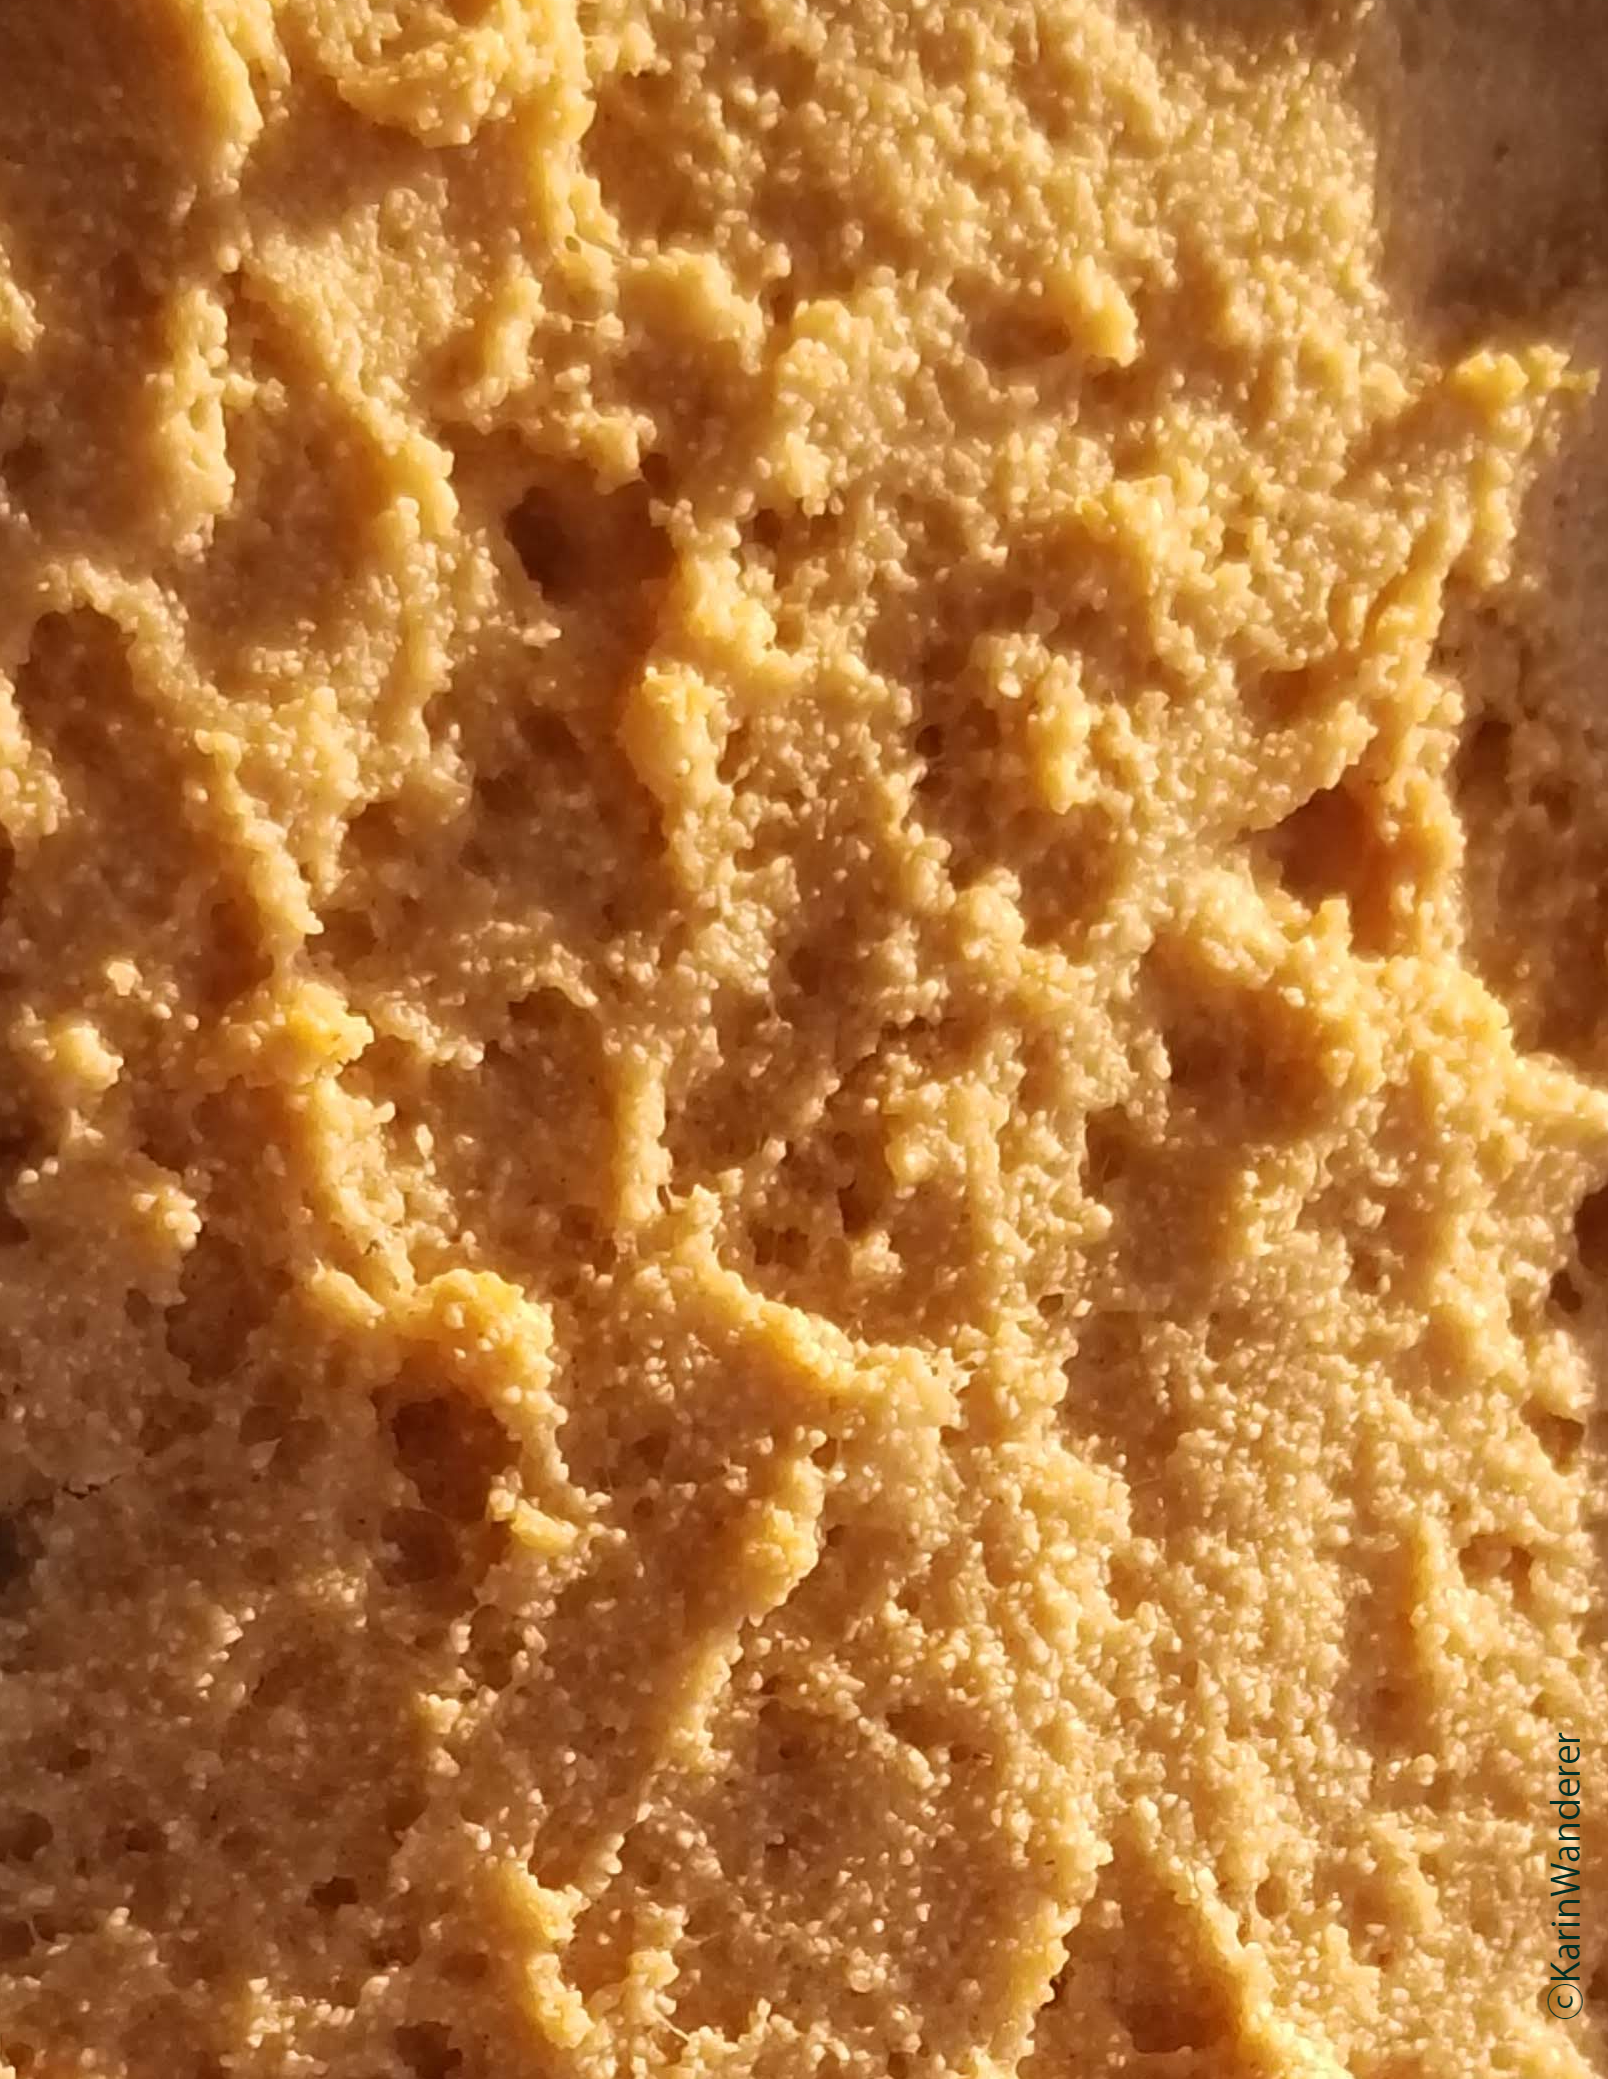 Photo of the golden brown delicious top of a loaf of peanut butter bread.